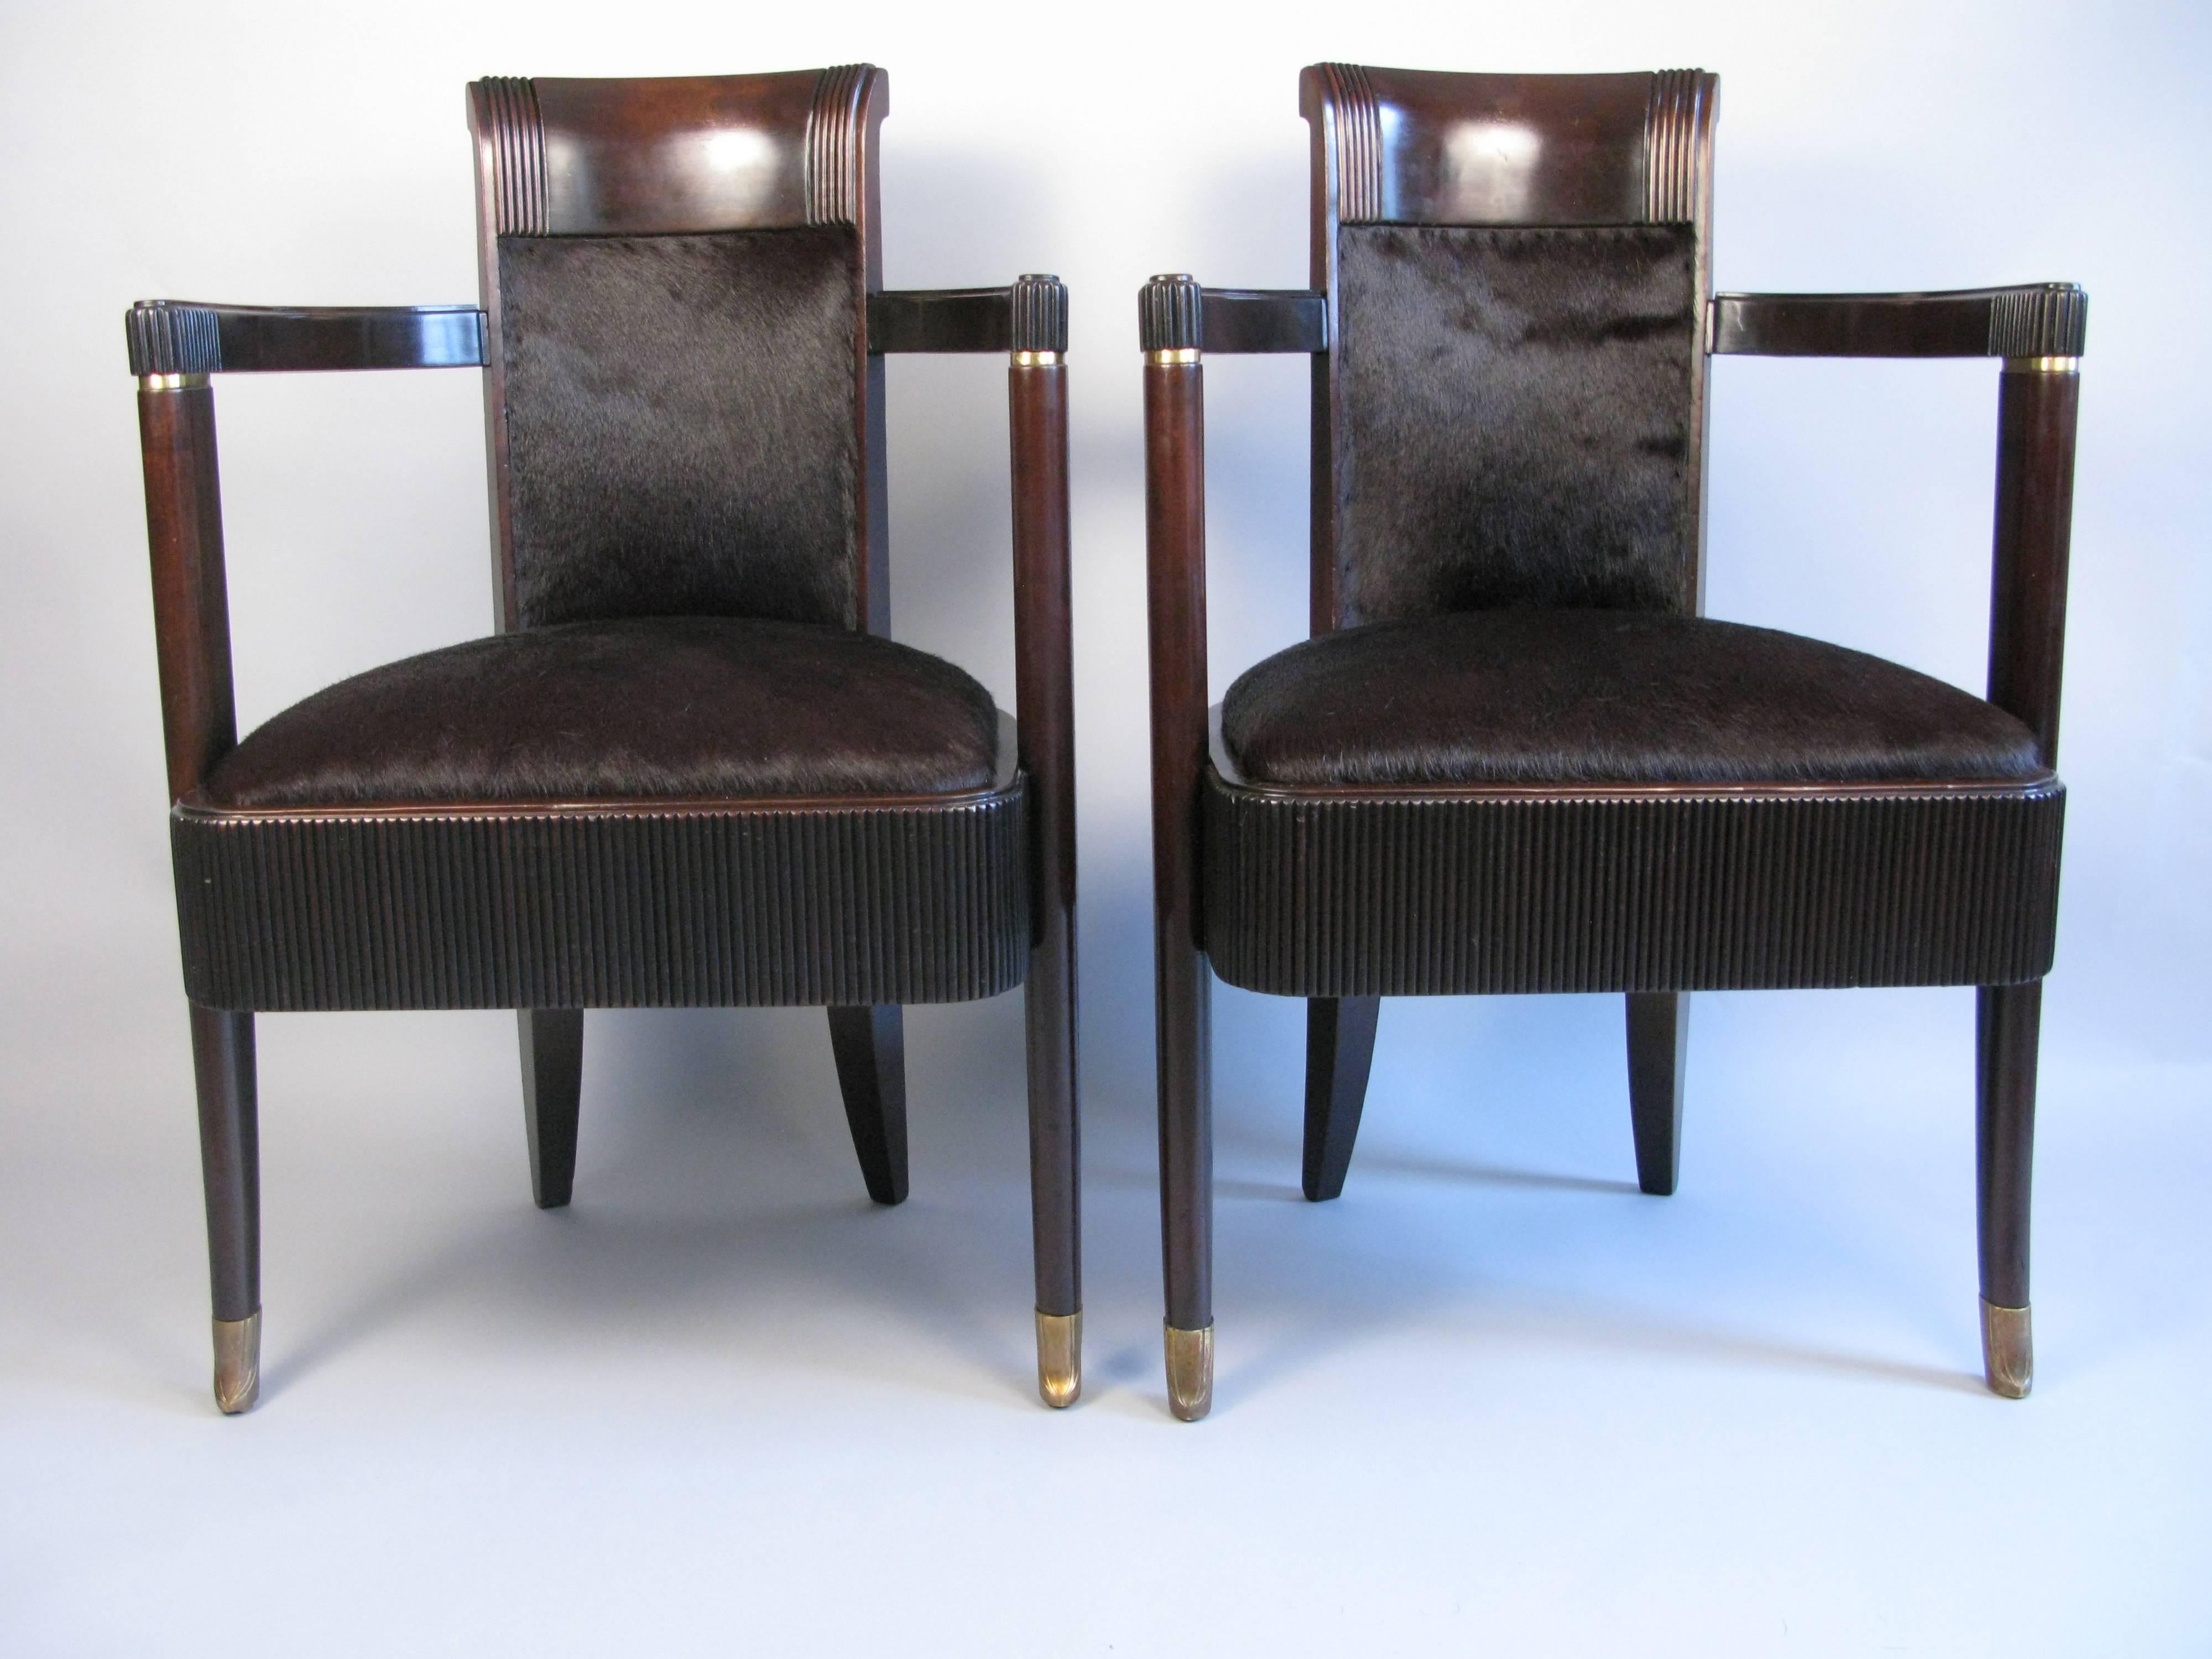 Art Deco Pair of Dining chairs from the French Luxury Liner S.S. Normandie 1935-1942